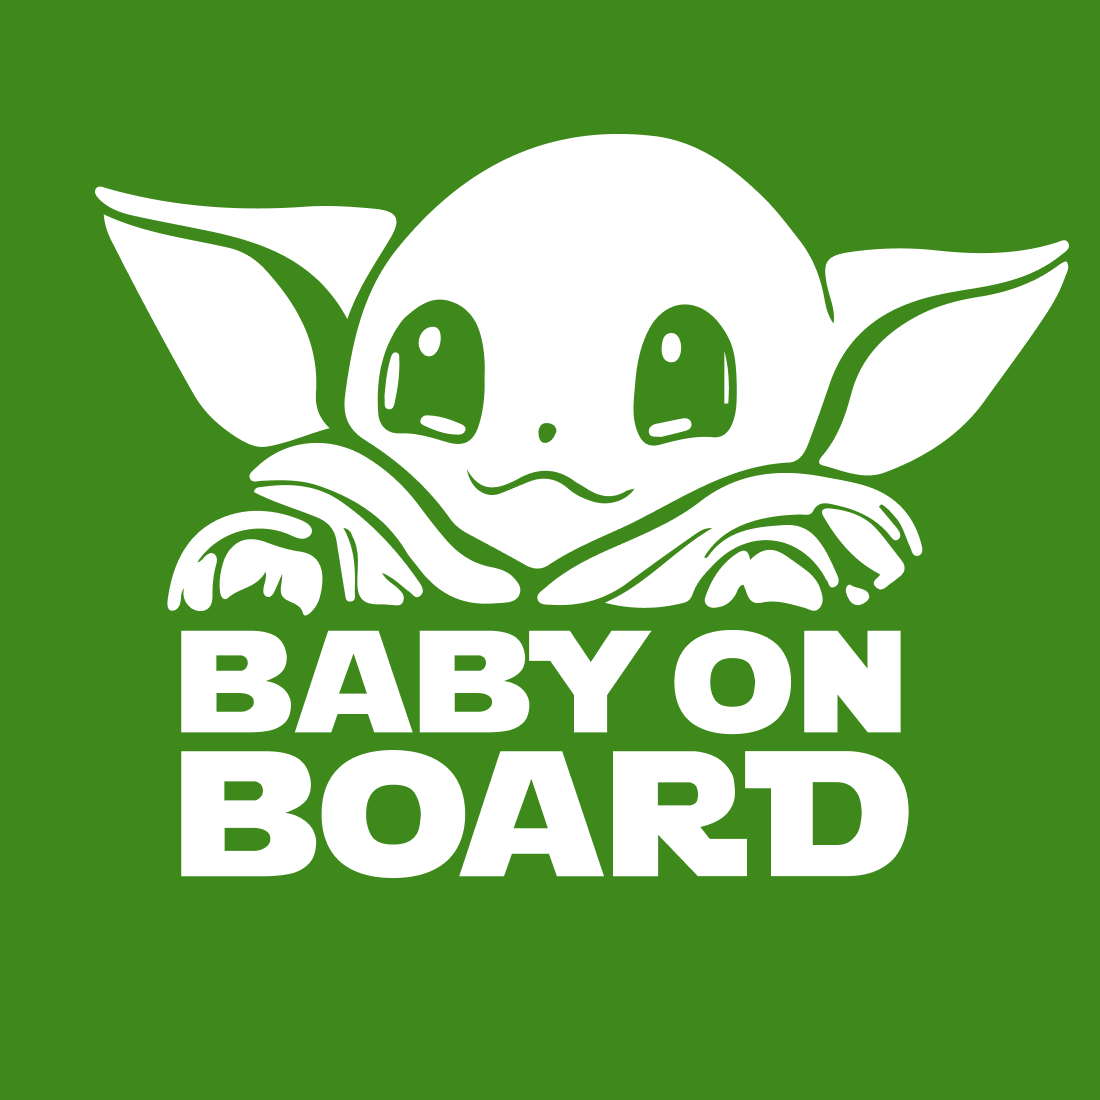 Free Baby on Board SVG cover image.